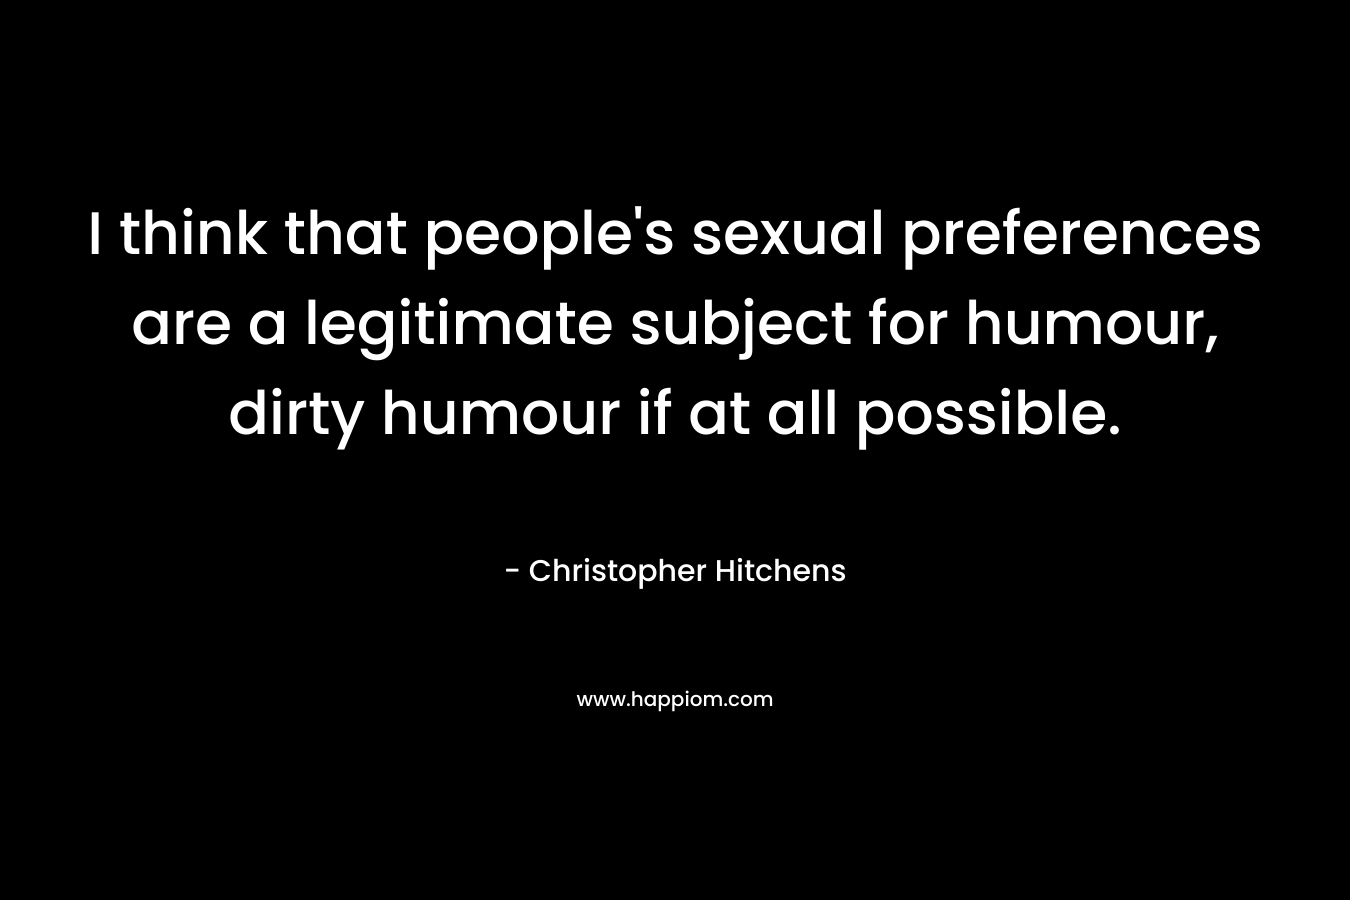 I think that people’s sexual preferences are a legitimate subject for humour, dirty humour if at all possible. – Christopher Hitchens